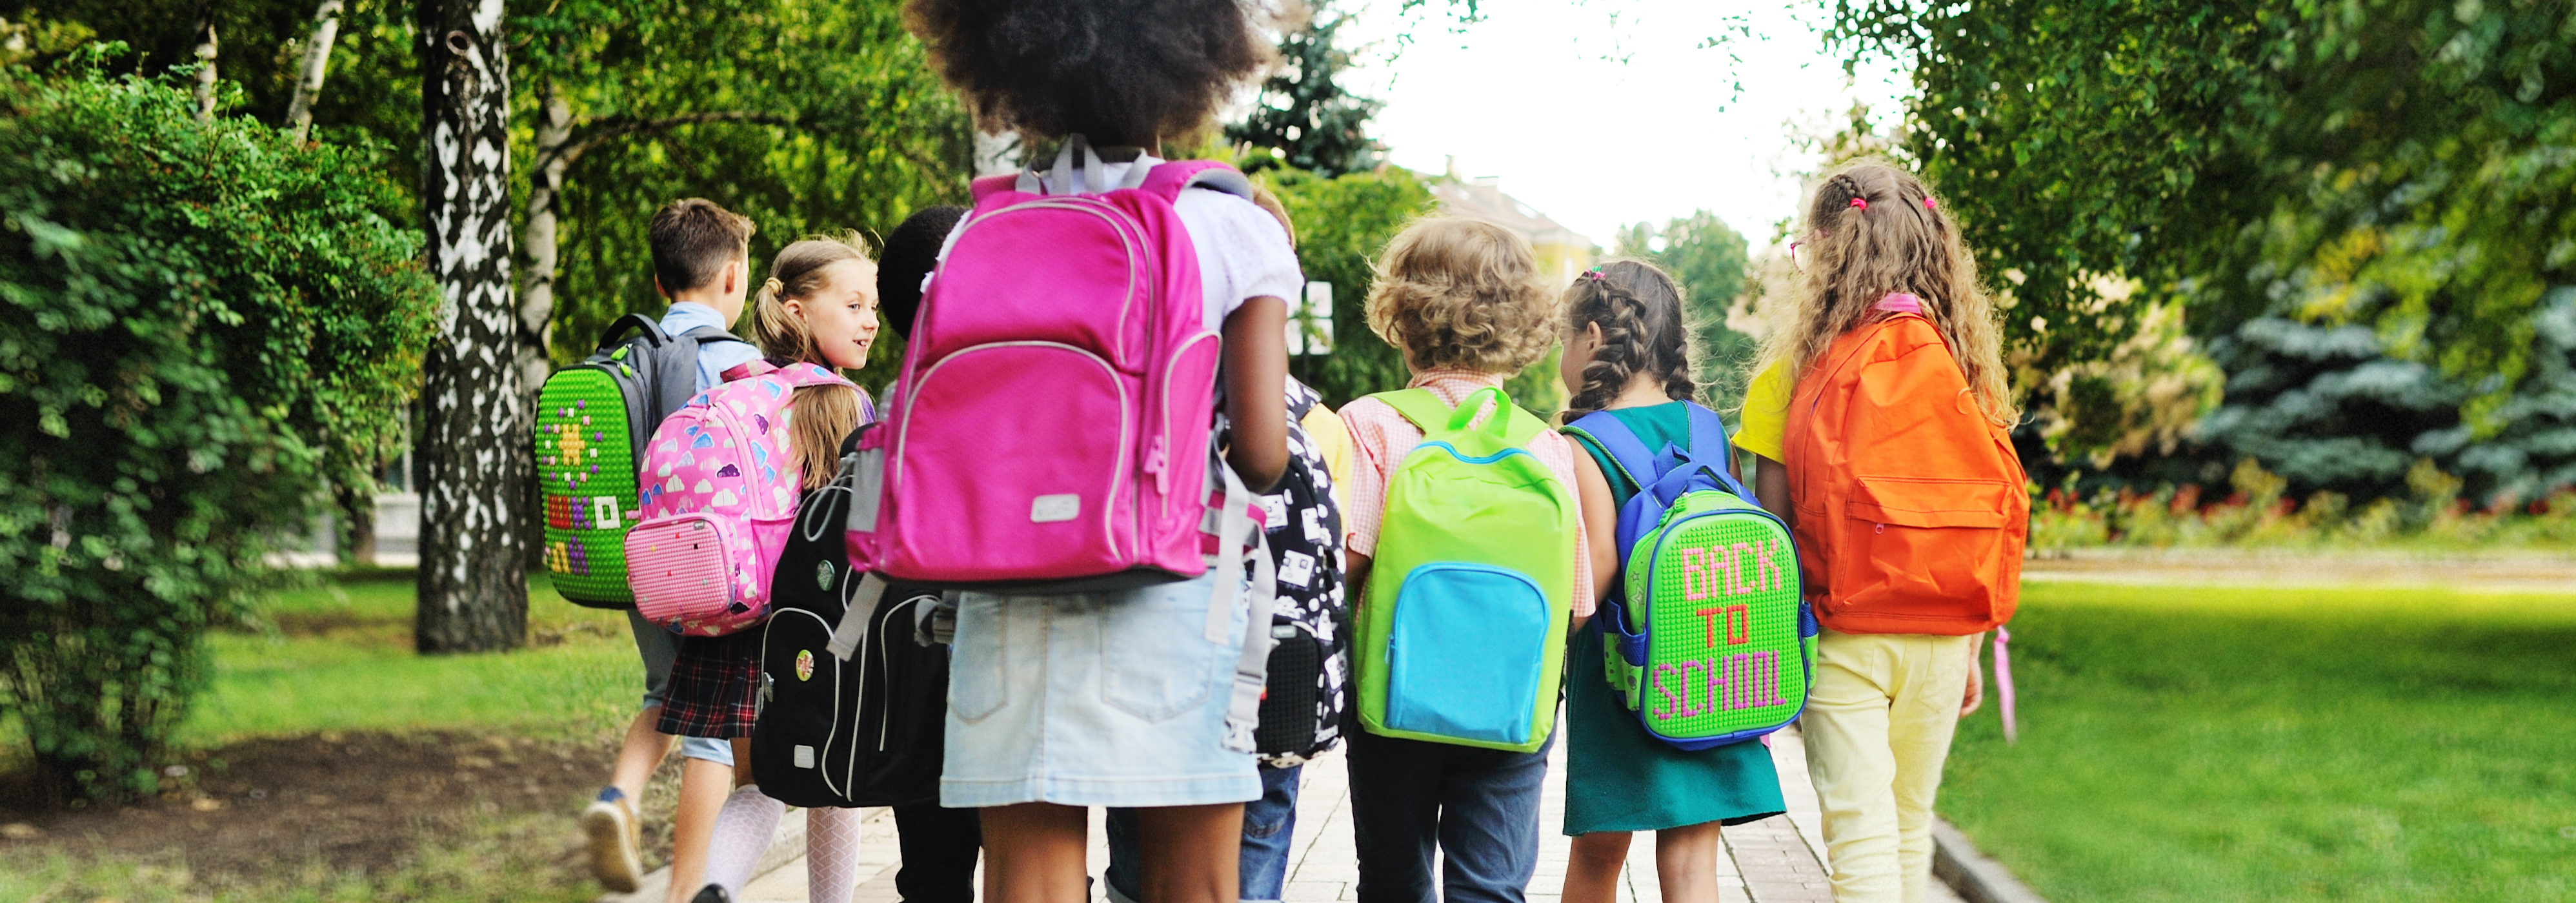 elementary students with backpacks